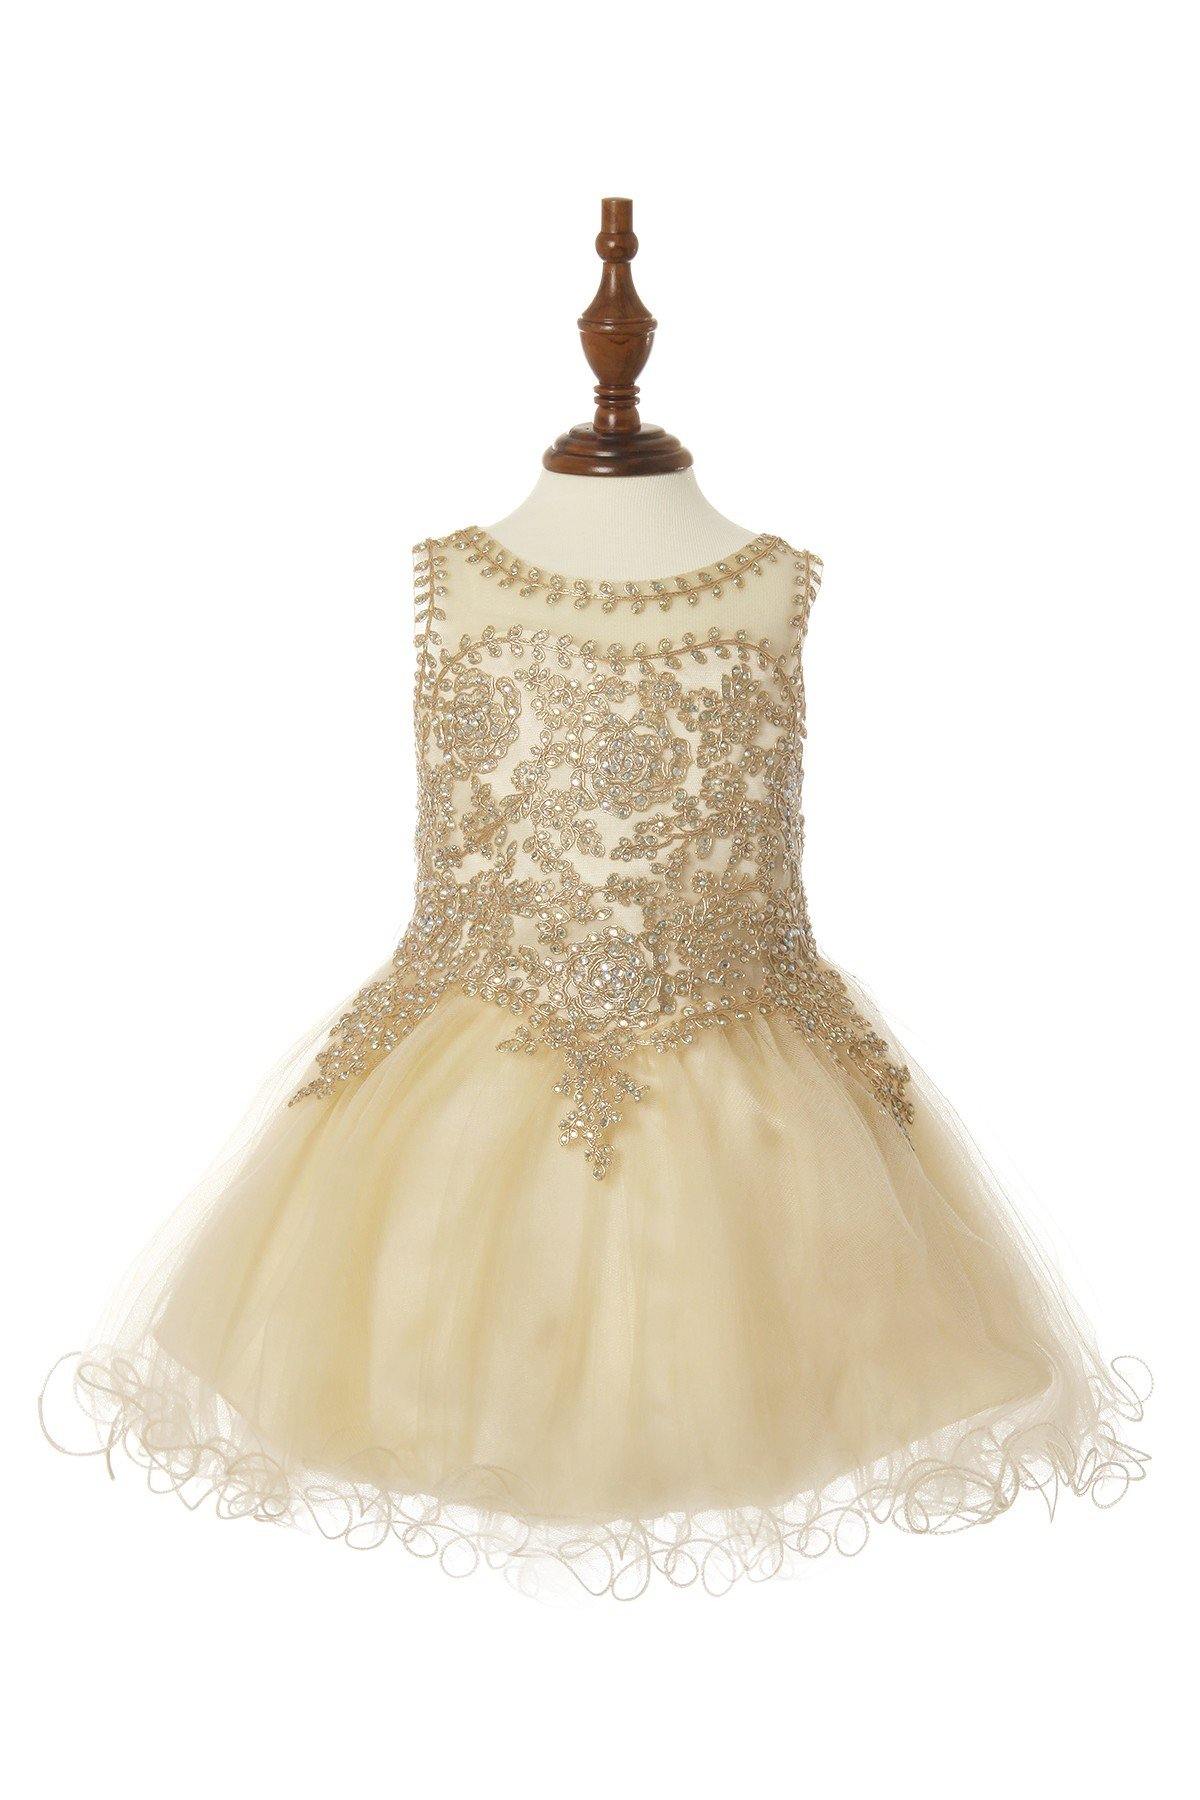 Sleeveless Gold Embellished Short Party Dress - The Dress Outlet Cinderella Couture